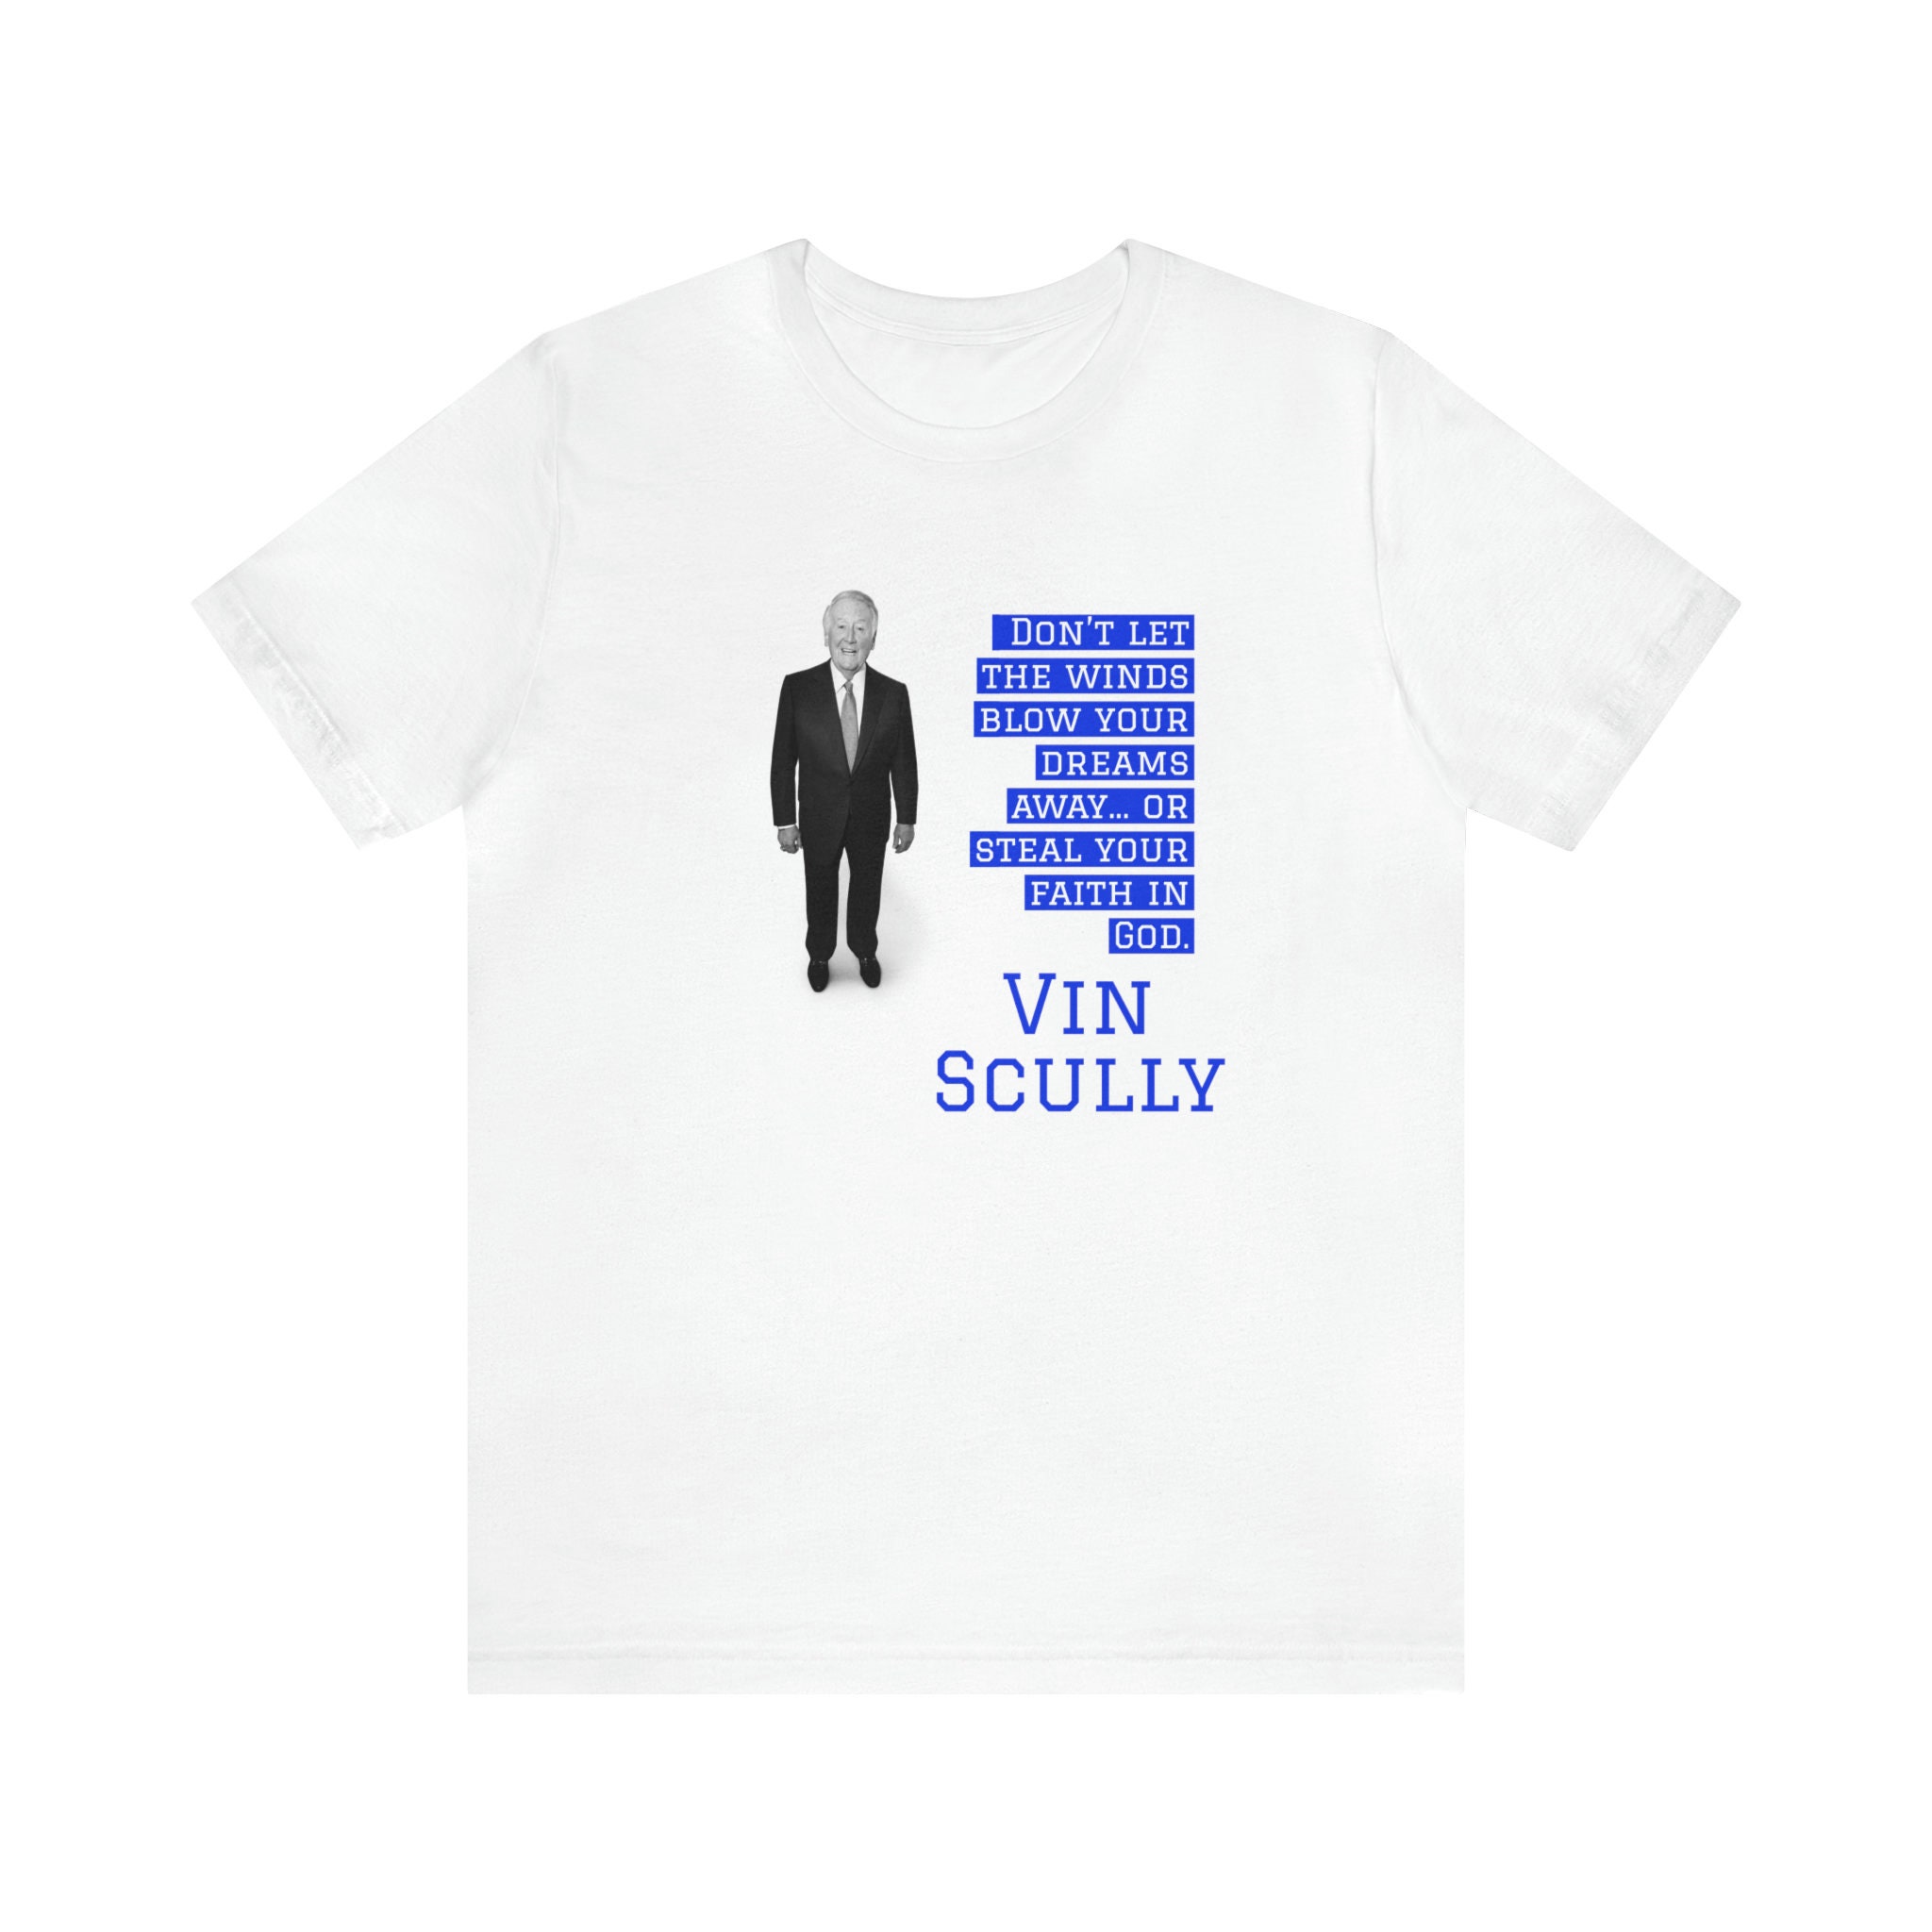 Vin Scully The Dodgers Abbey Road Shirt, Vintage Vin Scully RIP Shirt S-3XL